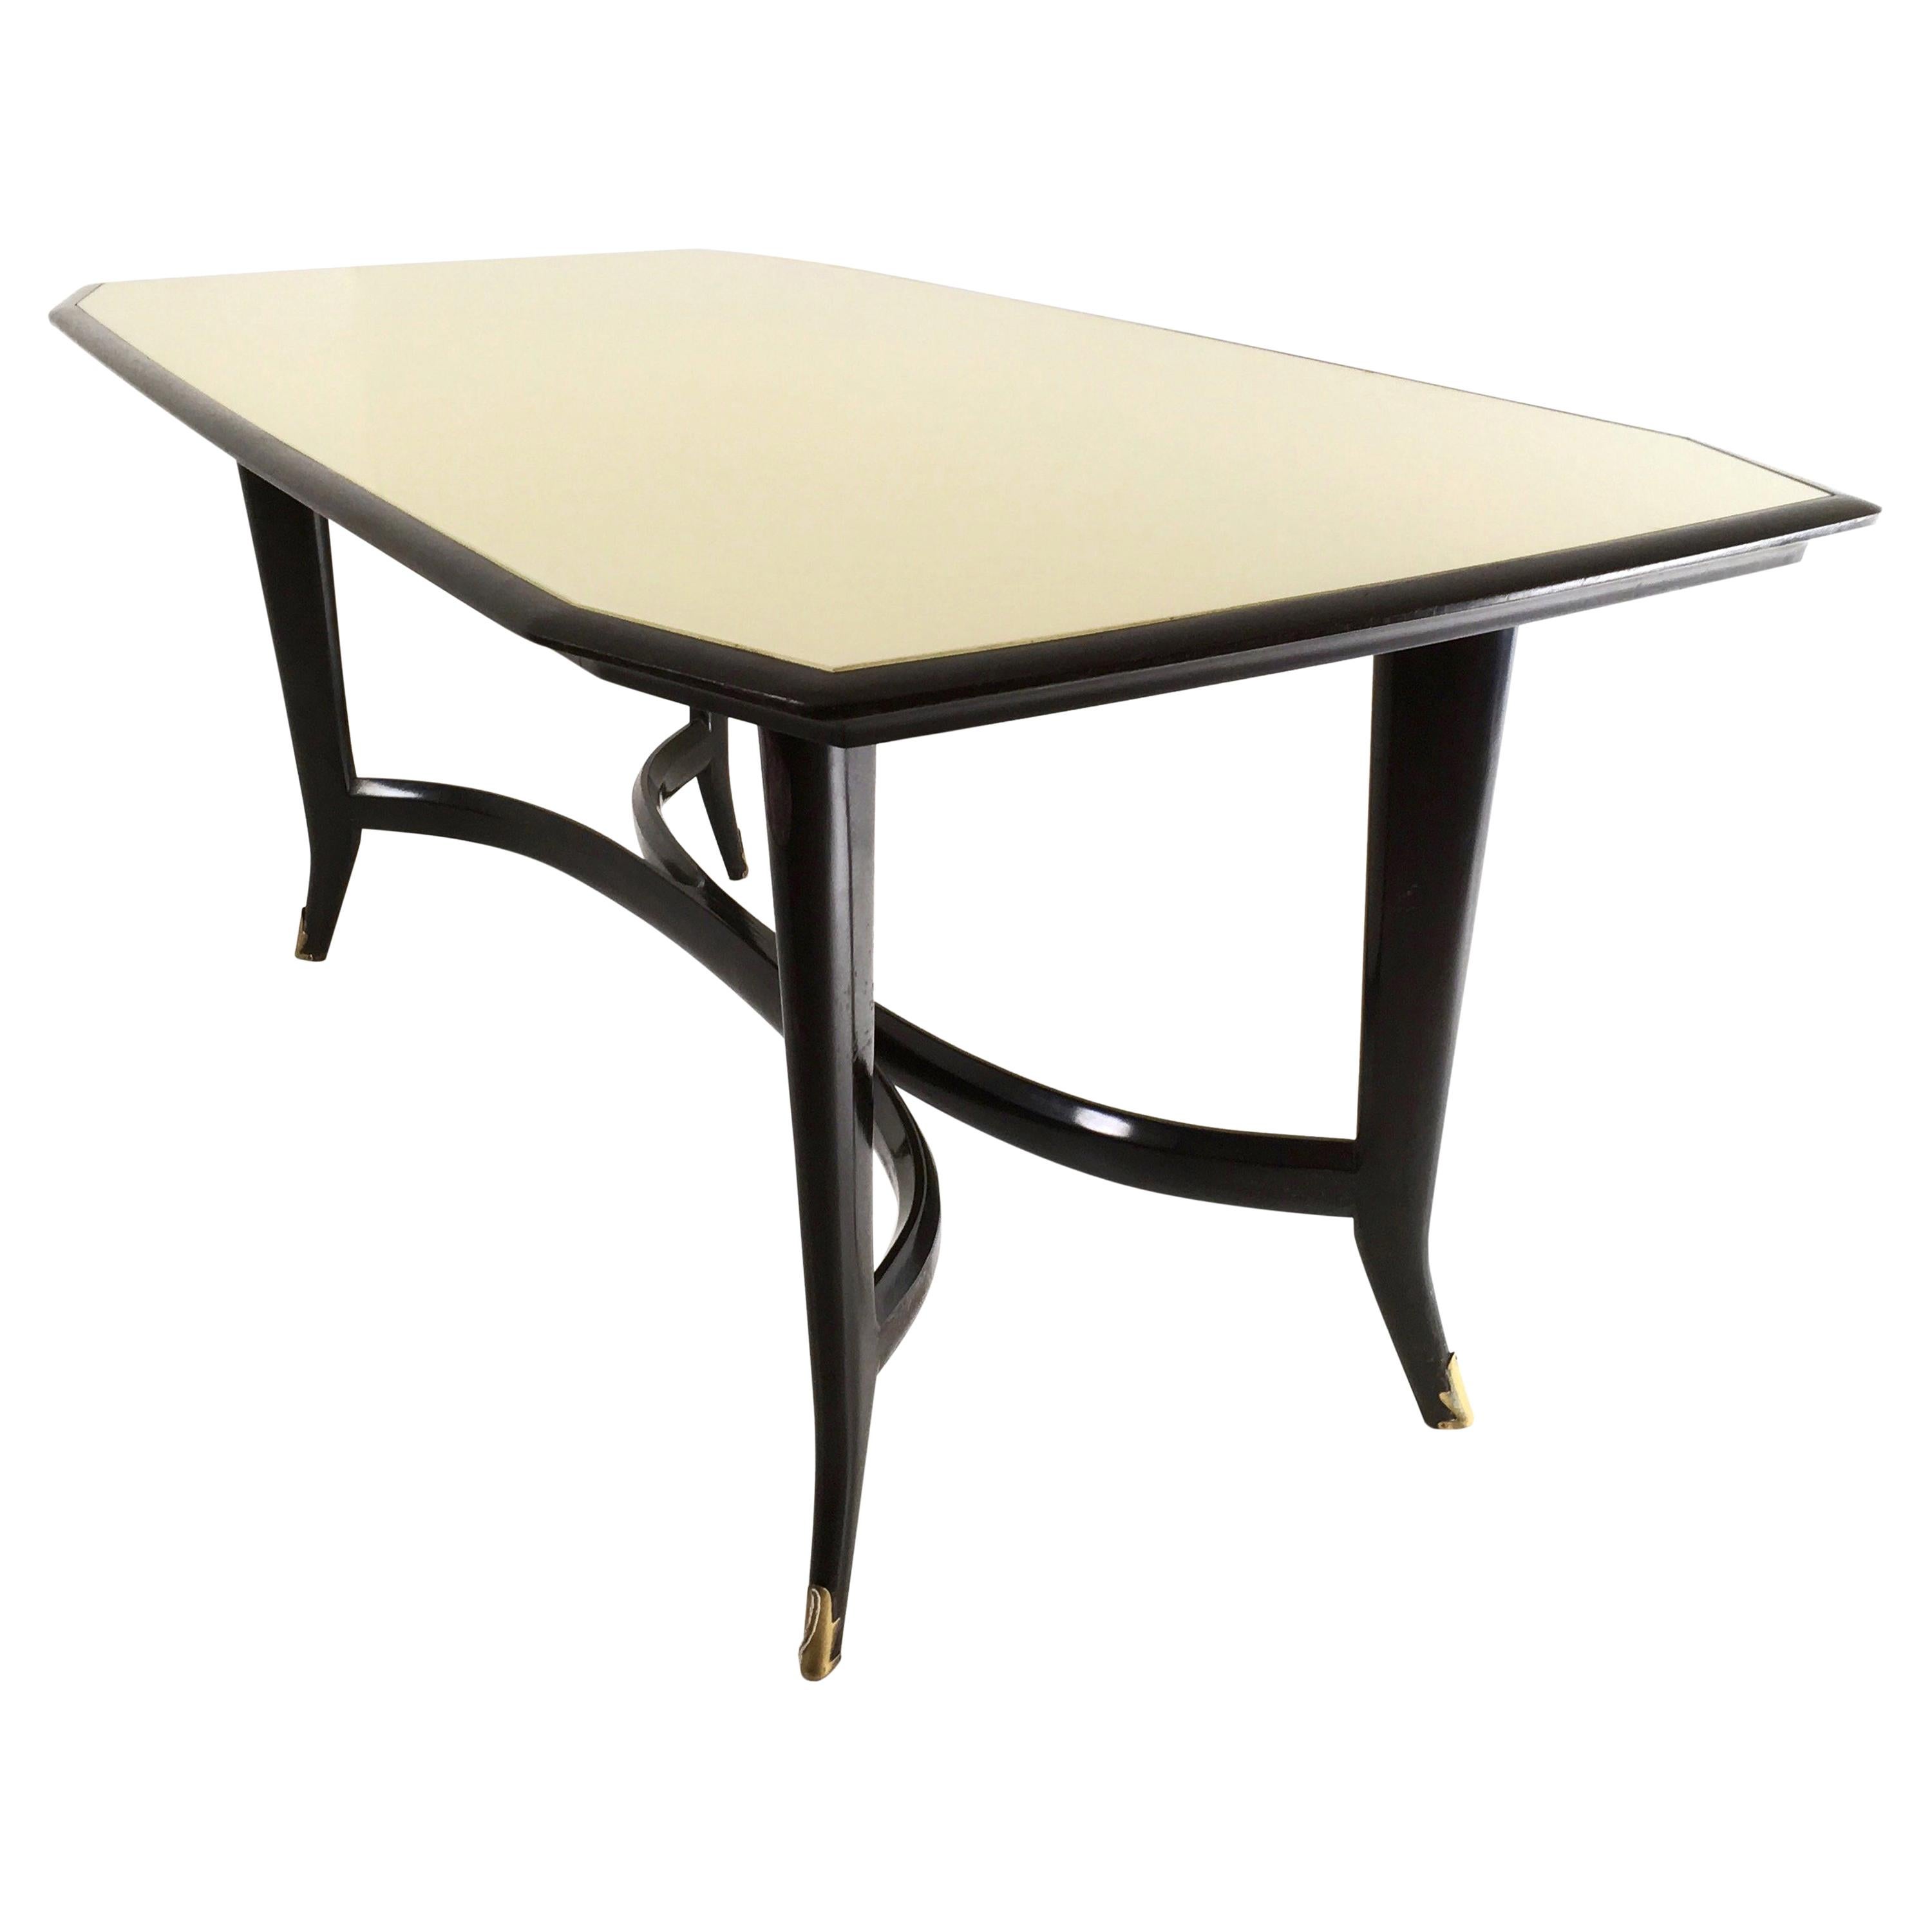 Ebonized Beech Dining Table ascribable to Ulrich with a Glass Top, Italy